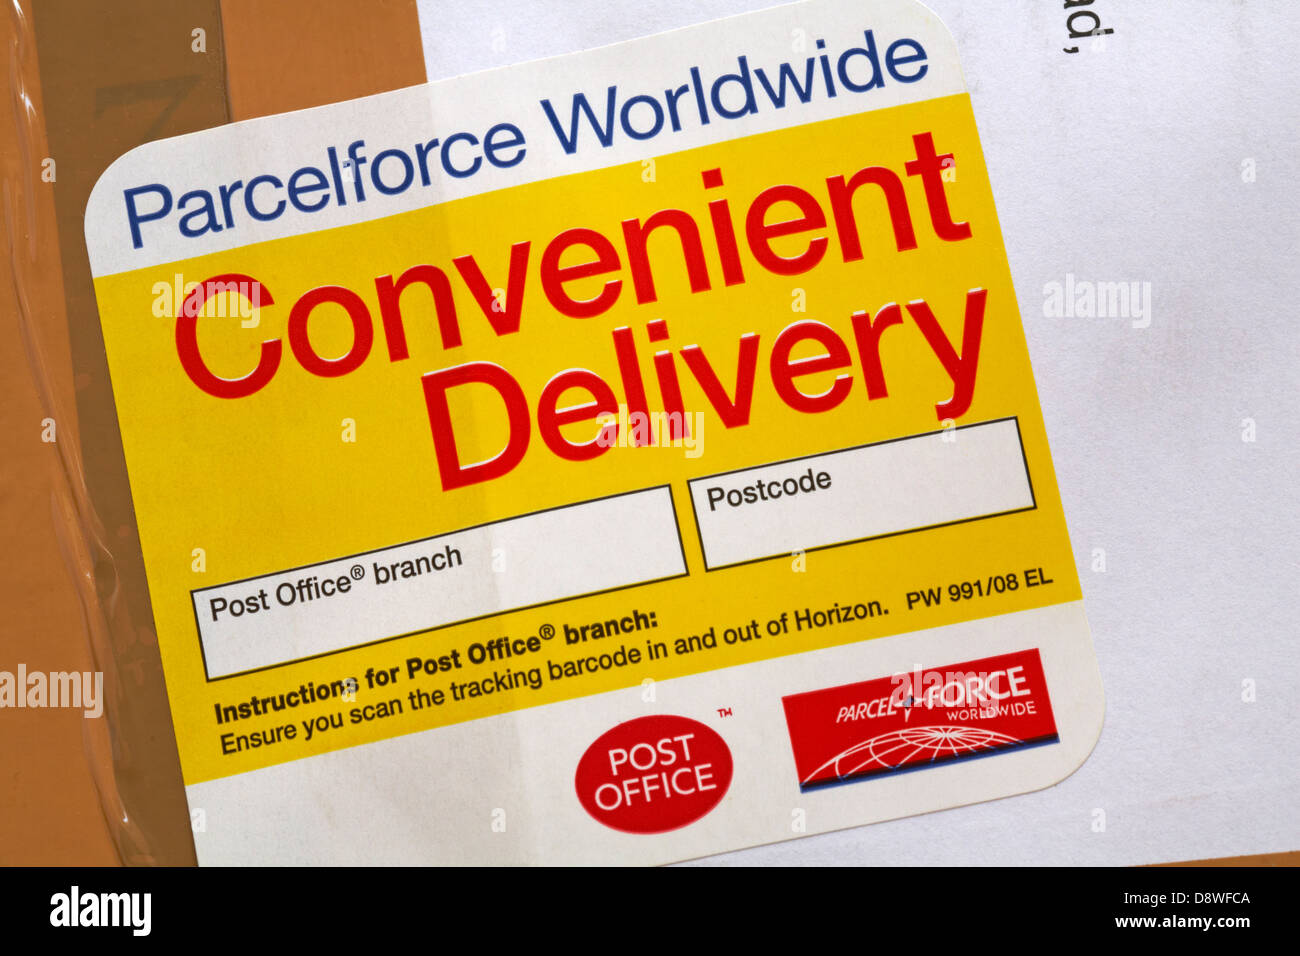 Parcelforce Worldwide Convenient Delivery sticker on parcel Stock Photo